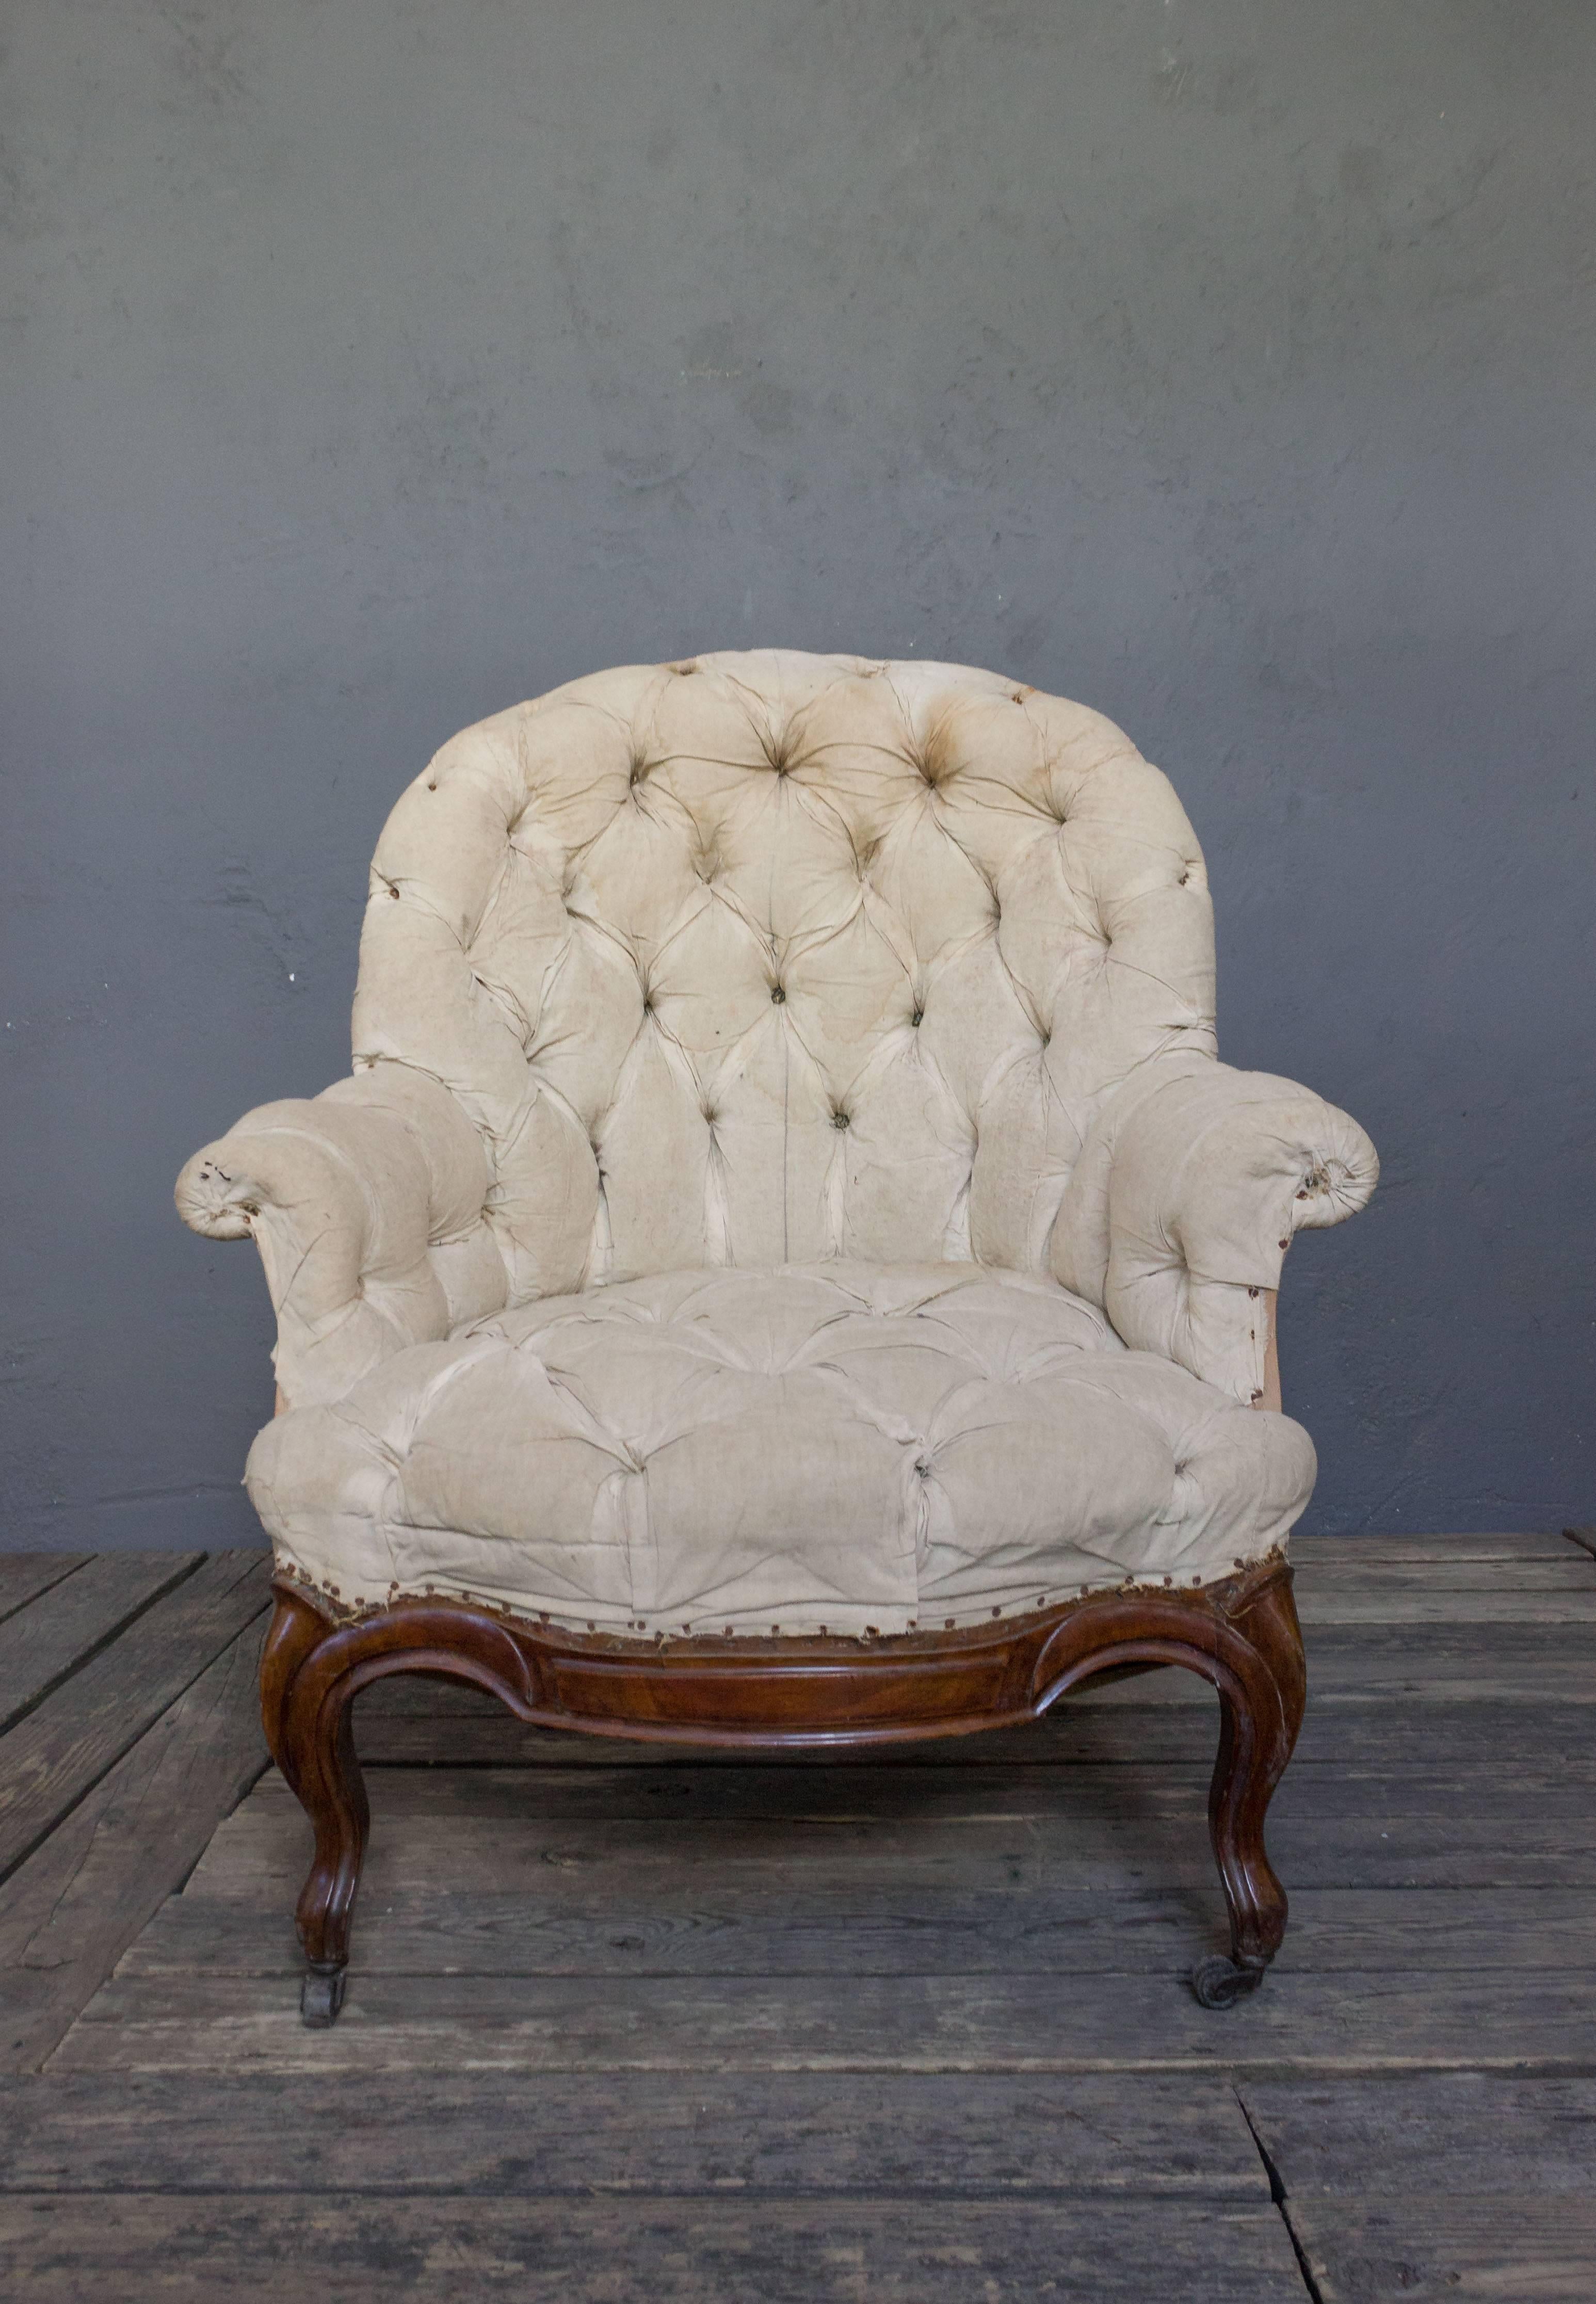 Pair of large French Napoleon III armchairs with polished cabriole wooden legs and trim. These chairs are heavily tufted with high rounded backs and rolled arms.